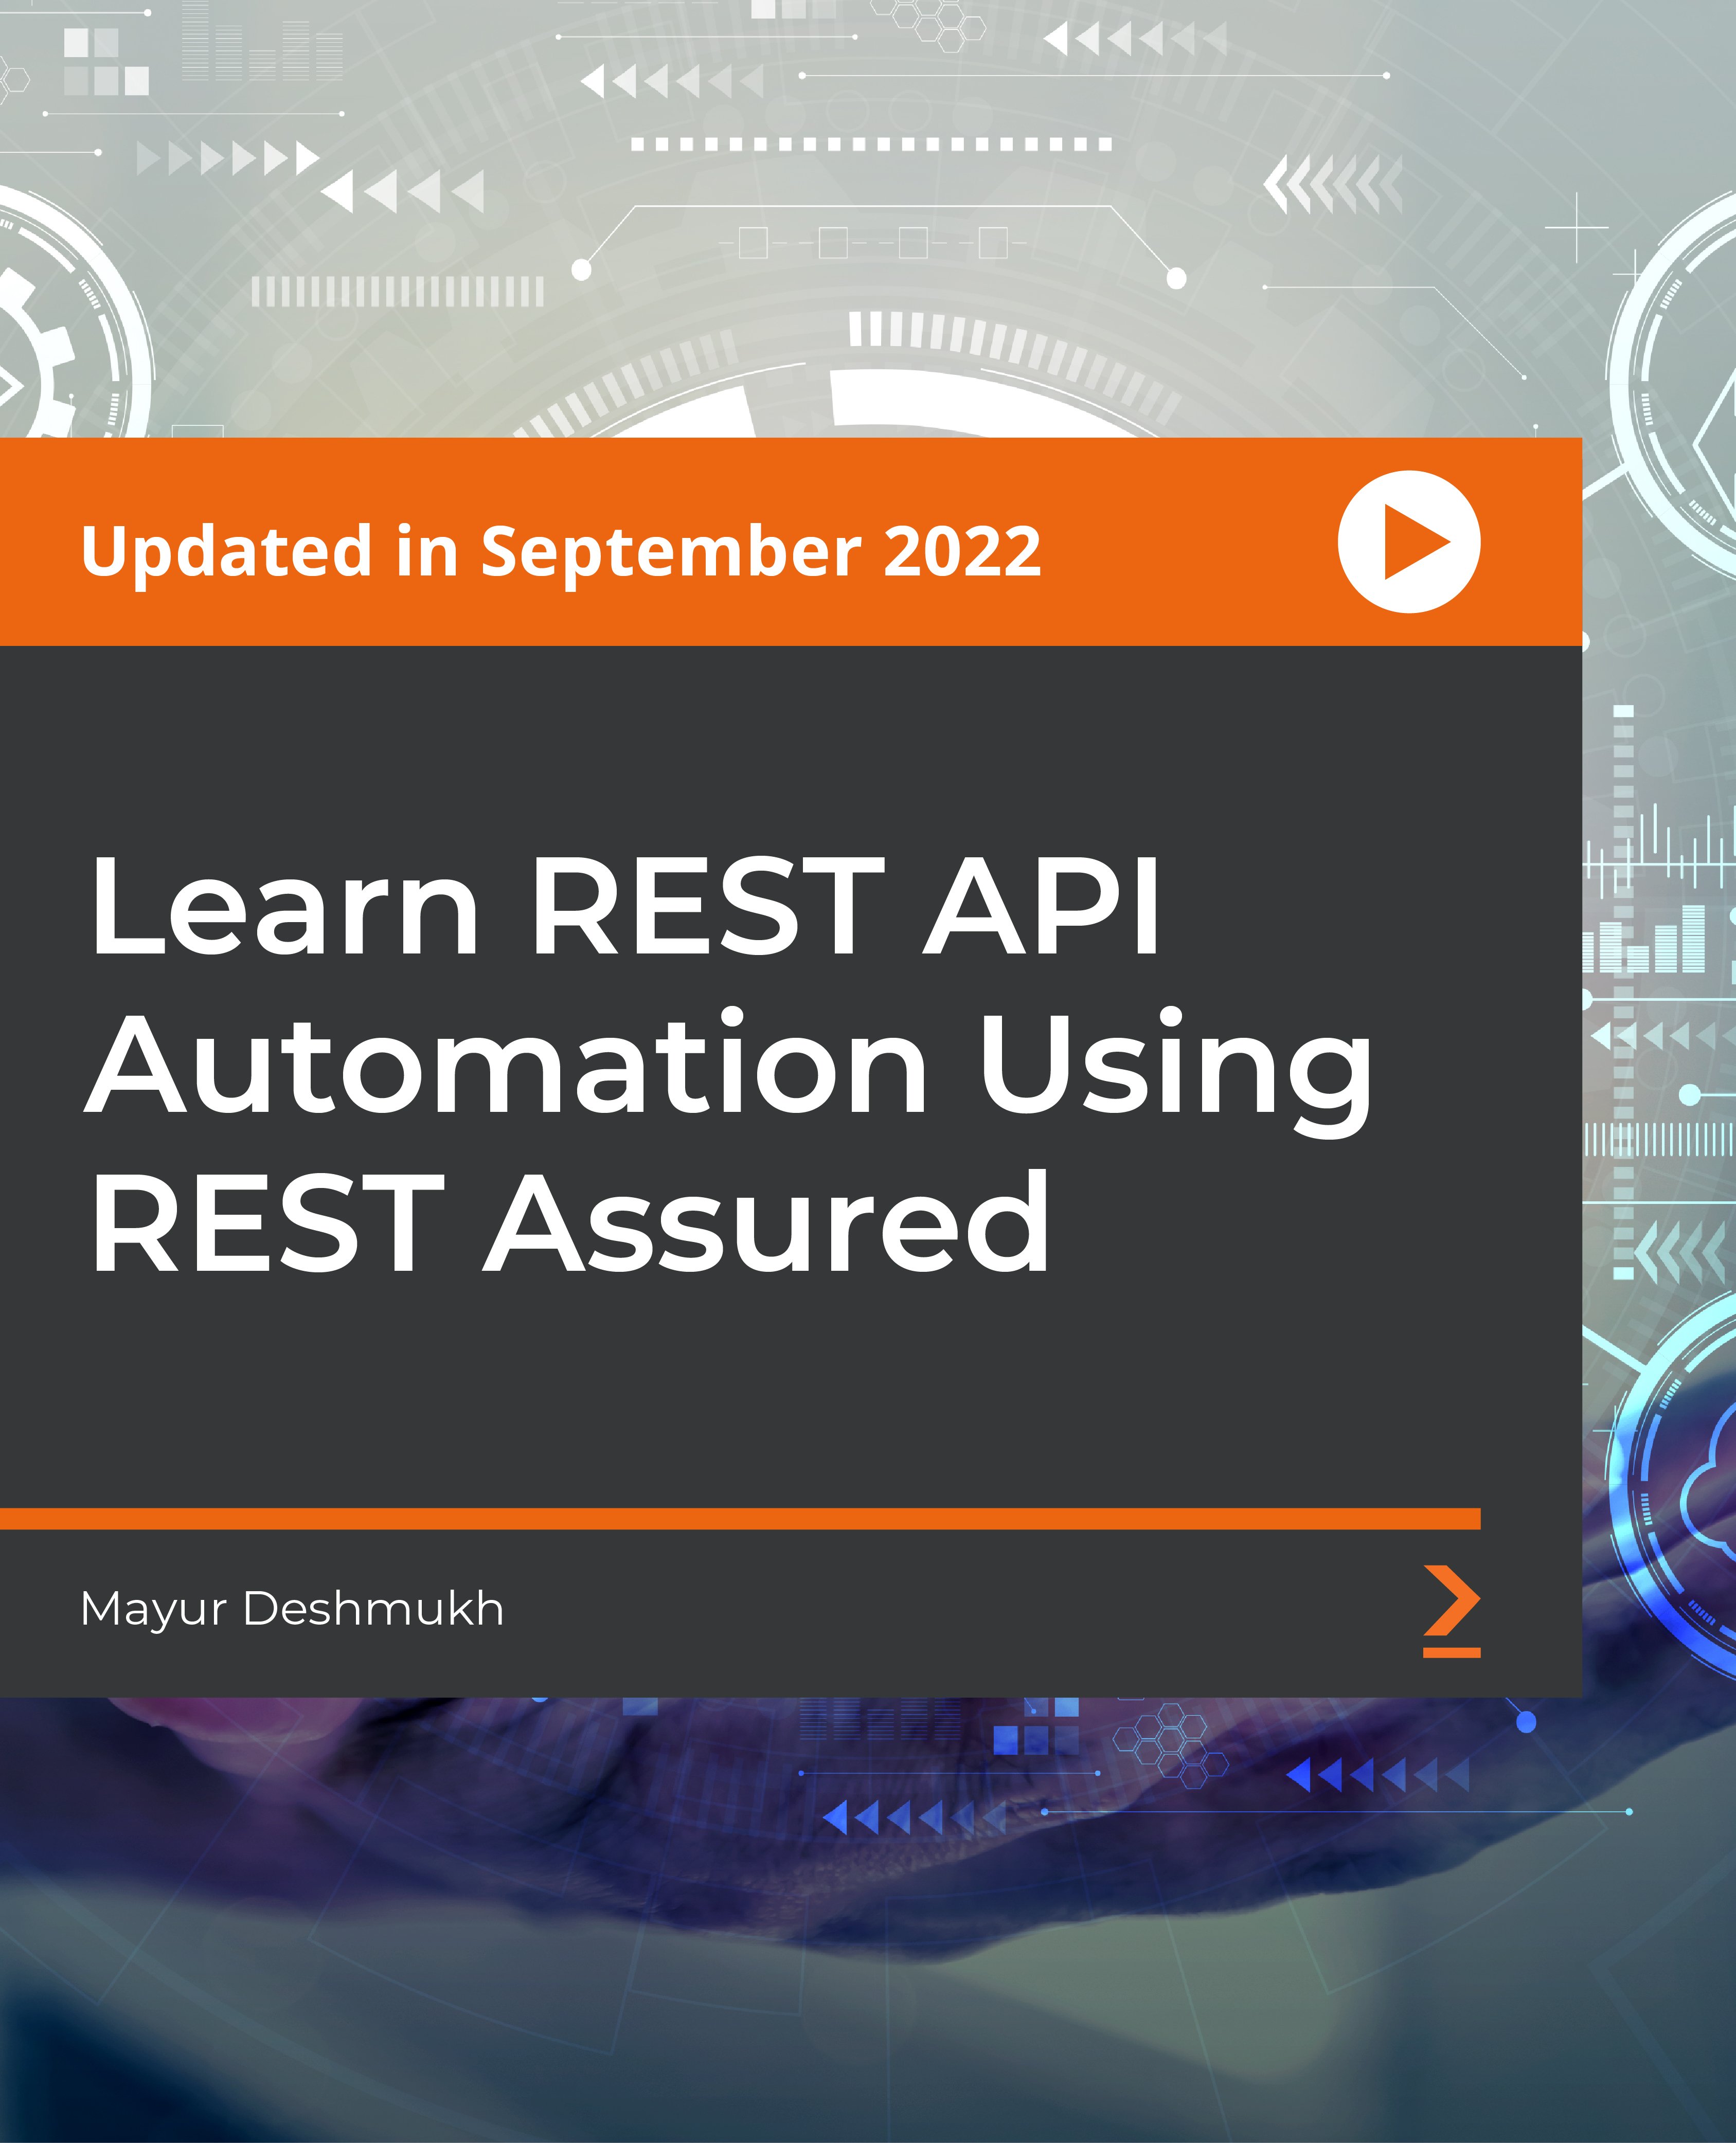 Learn REST API Automation Using REST Assured